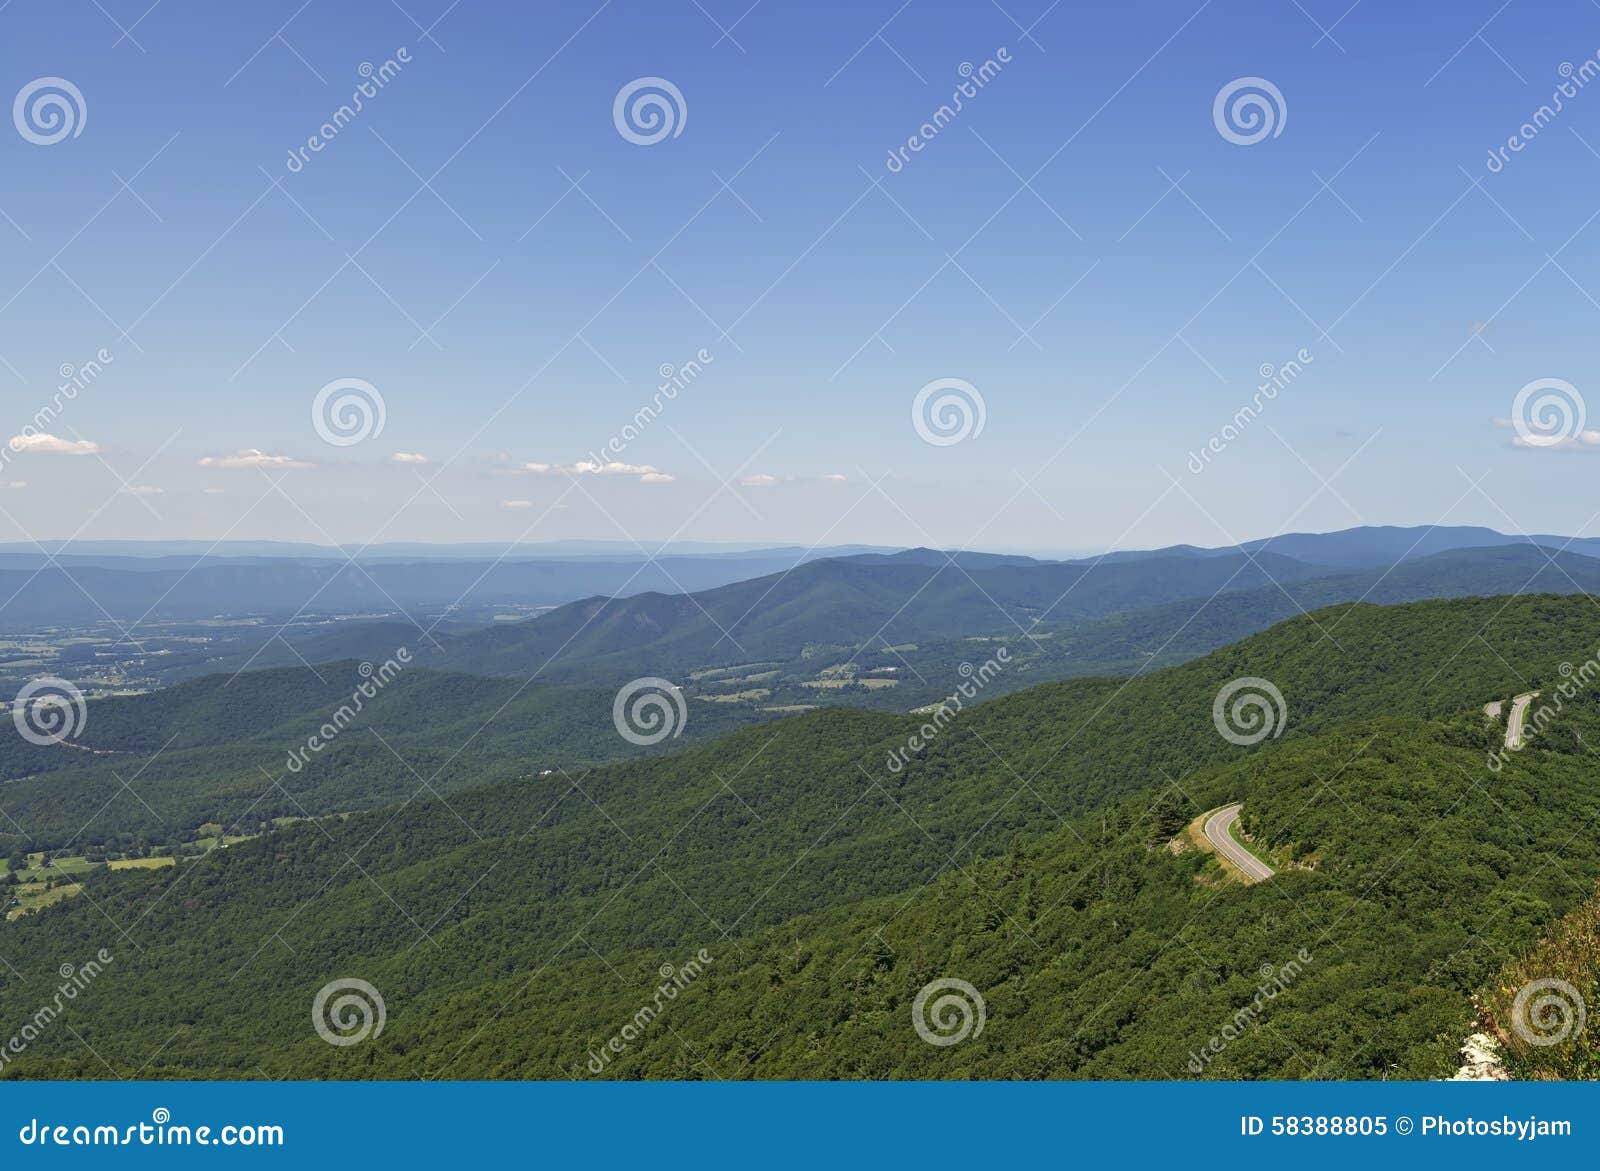 view from little stony man lookout, shenandoah national park